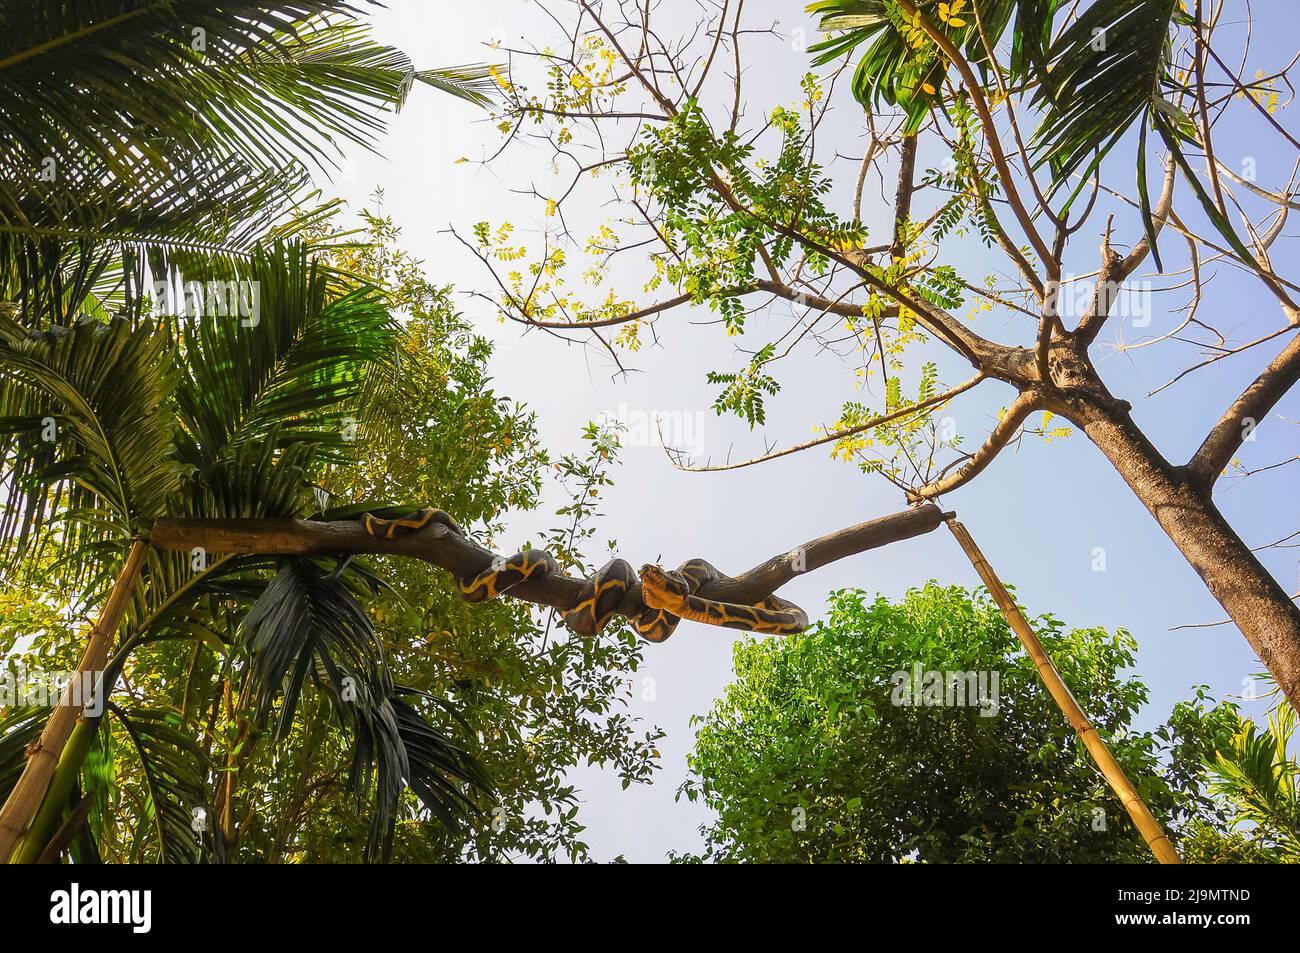 Artificial snake wrapped around a tree branch high overhead, Goa, India Stock Photo